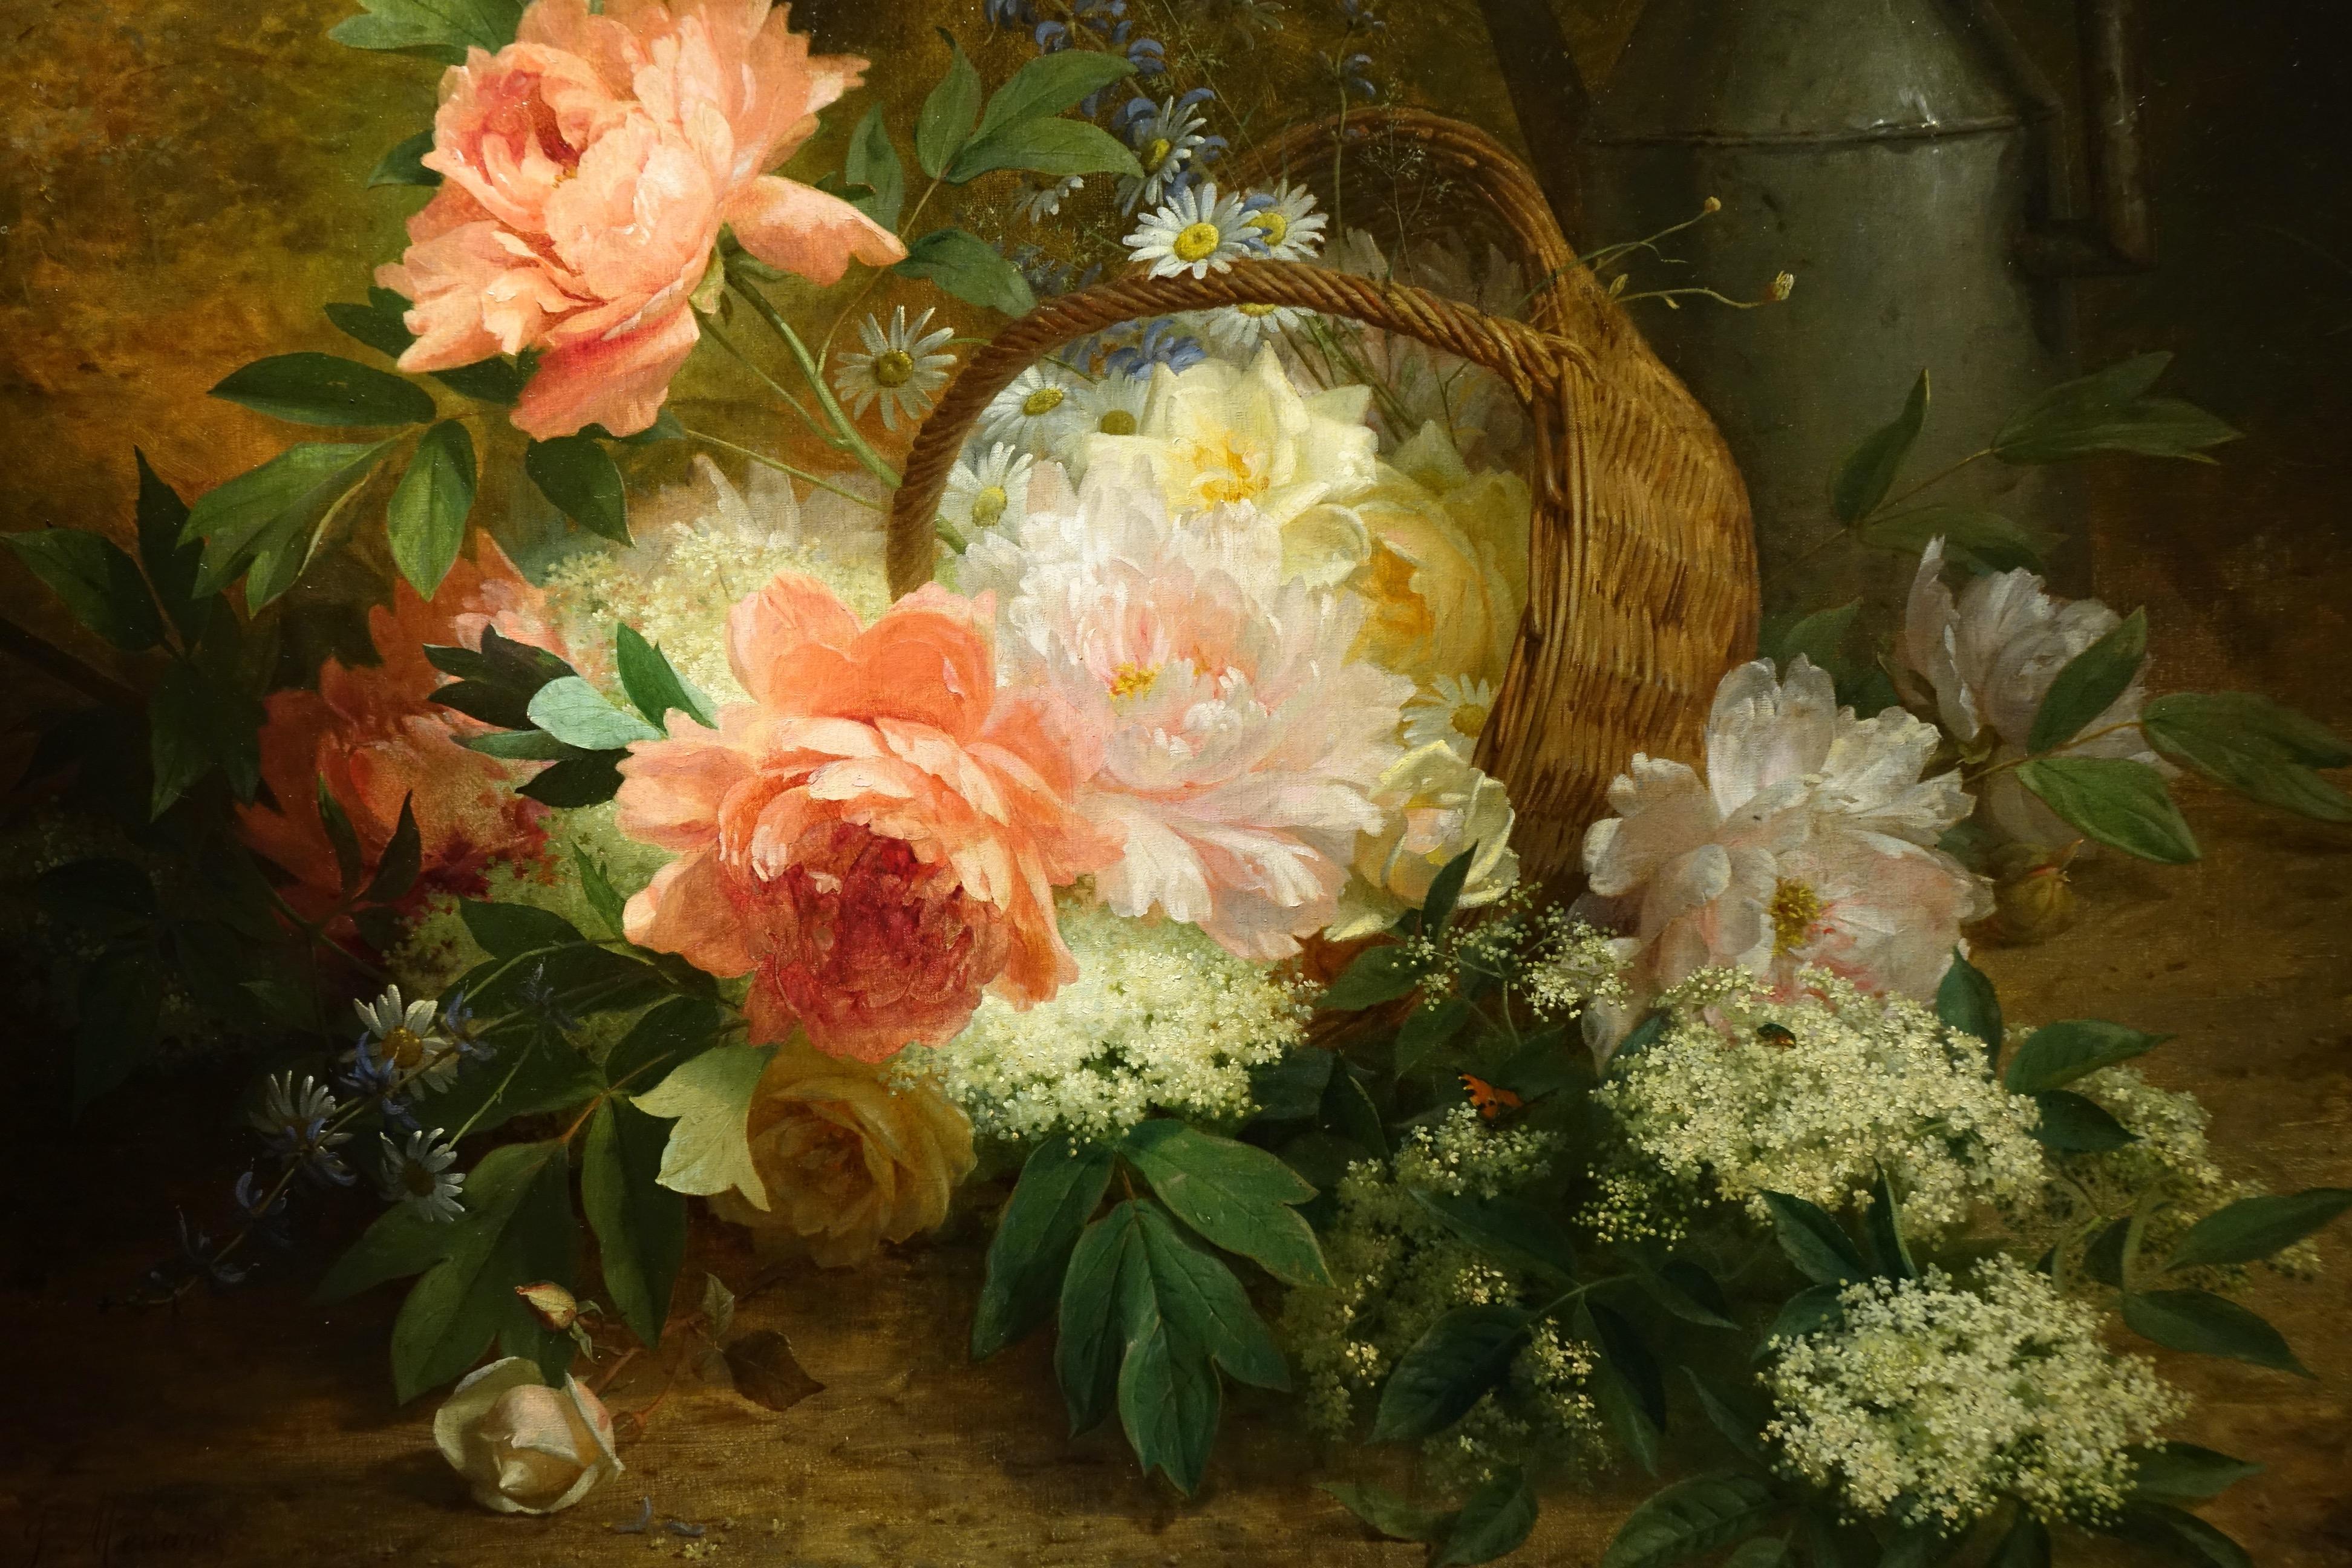 Oil on canvas representing a basket of flowers (peonies, wild flowers, etc.), with a tin watering can in the background.
Signed J. Médard, circa 1890.
Jules Ferdinand MEDARD, painter of flowers, born in Anzin in 1855. French School.

Médard entered